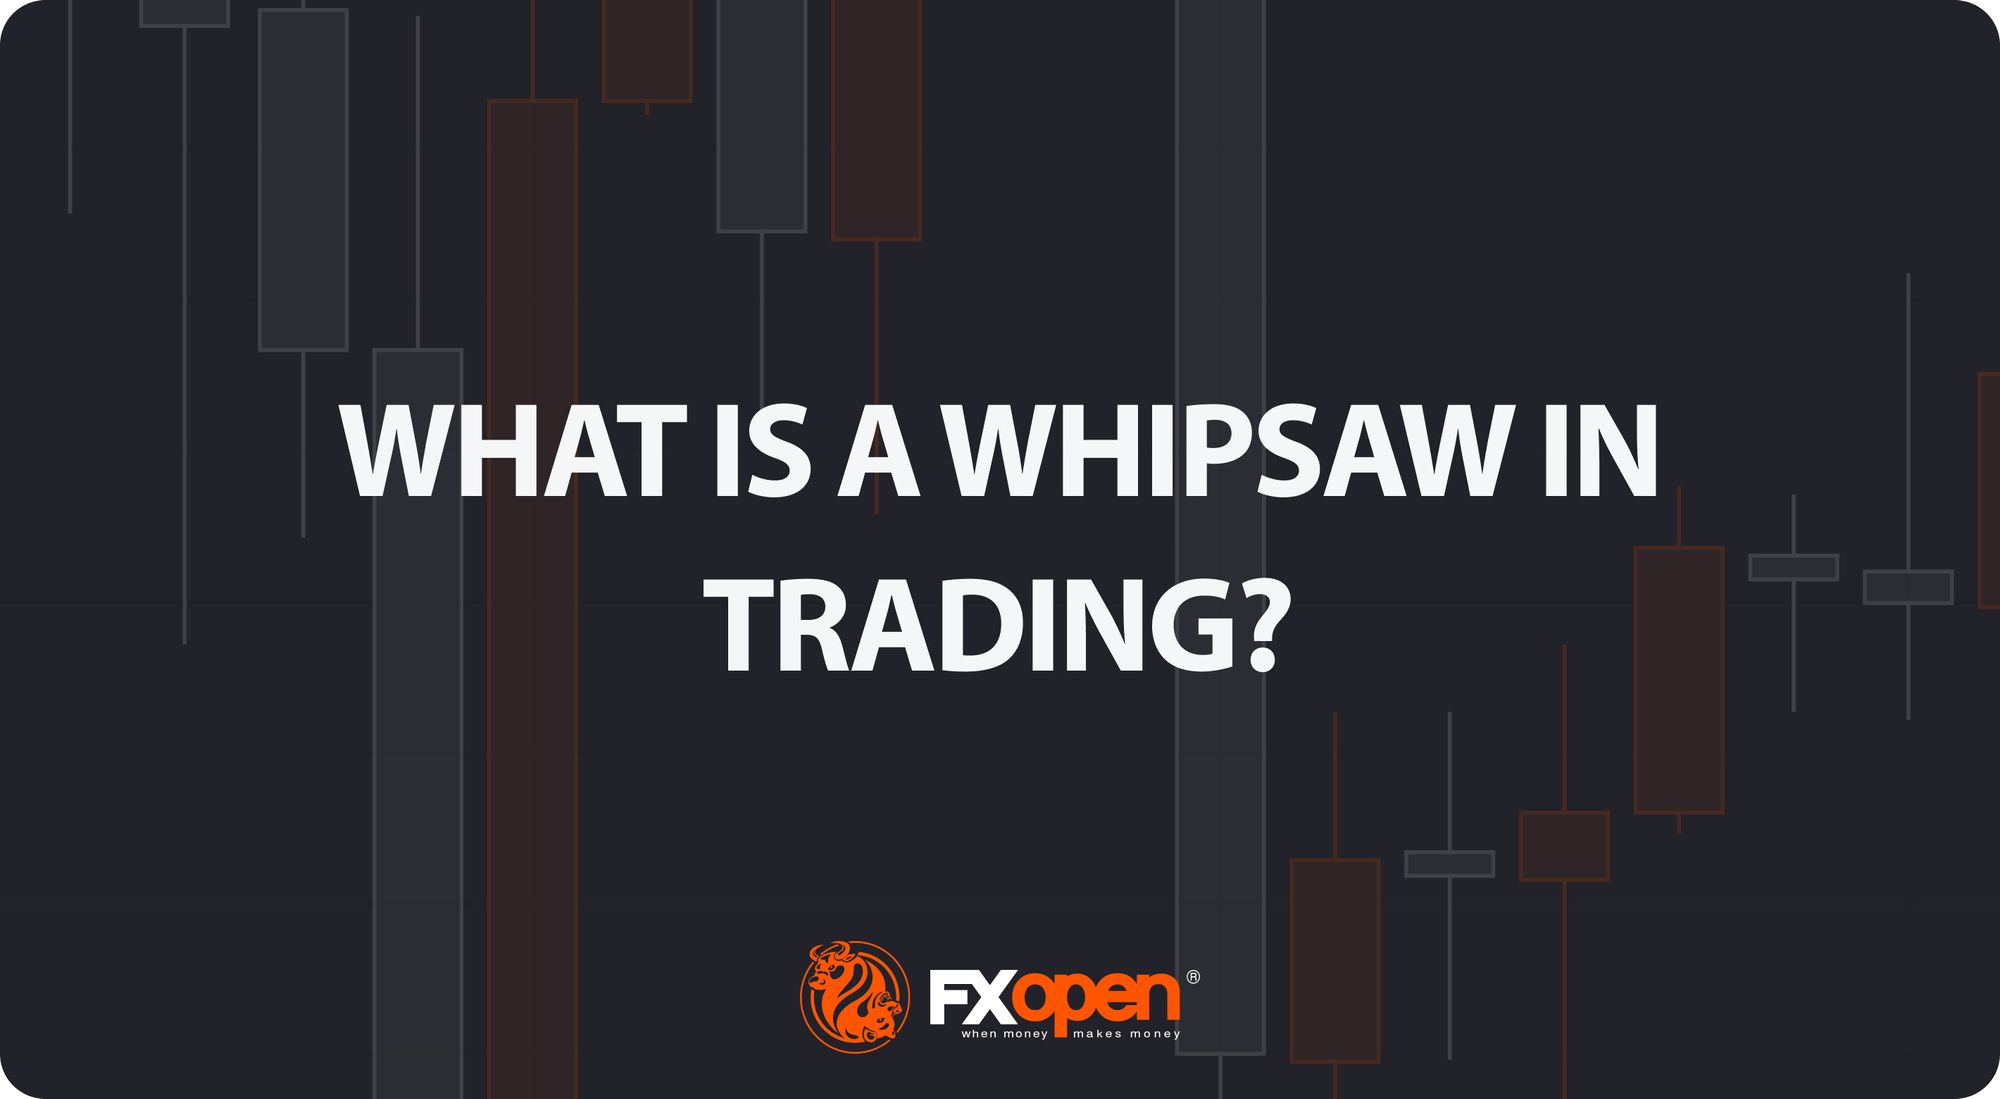 What Is a Whipsaw, and How Can One Trade It?